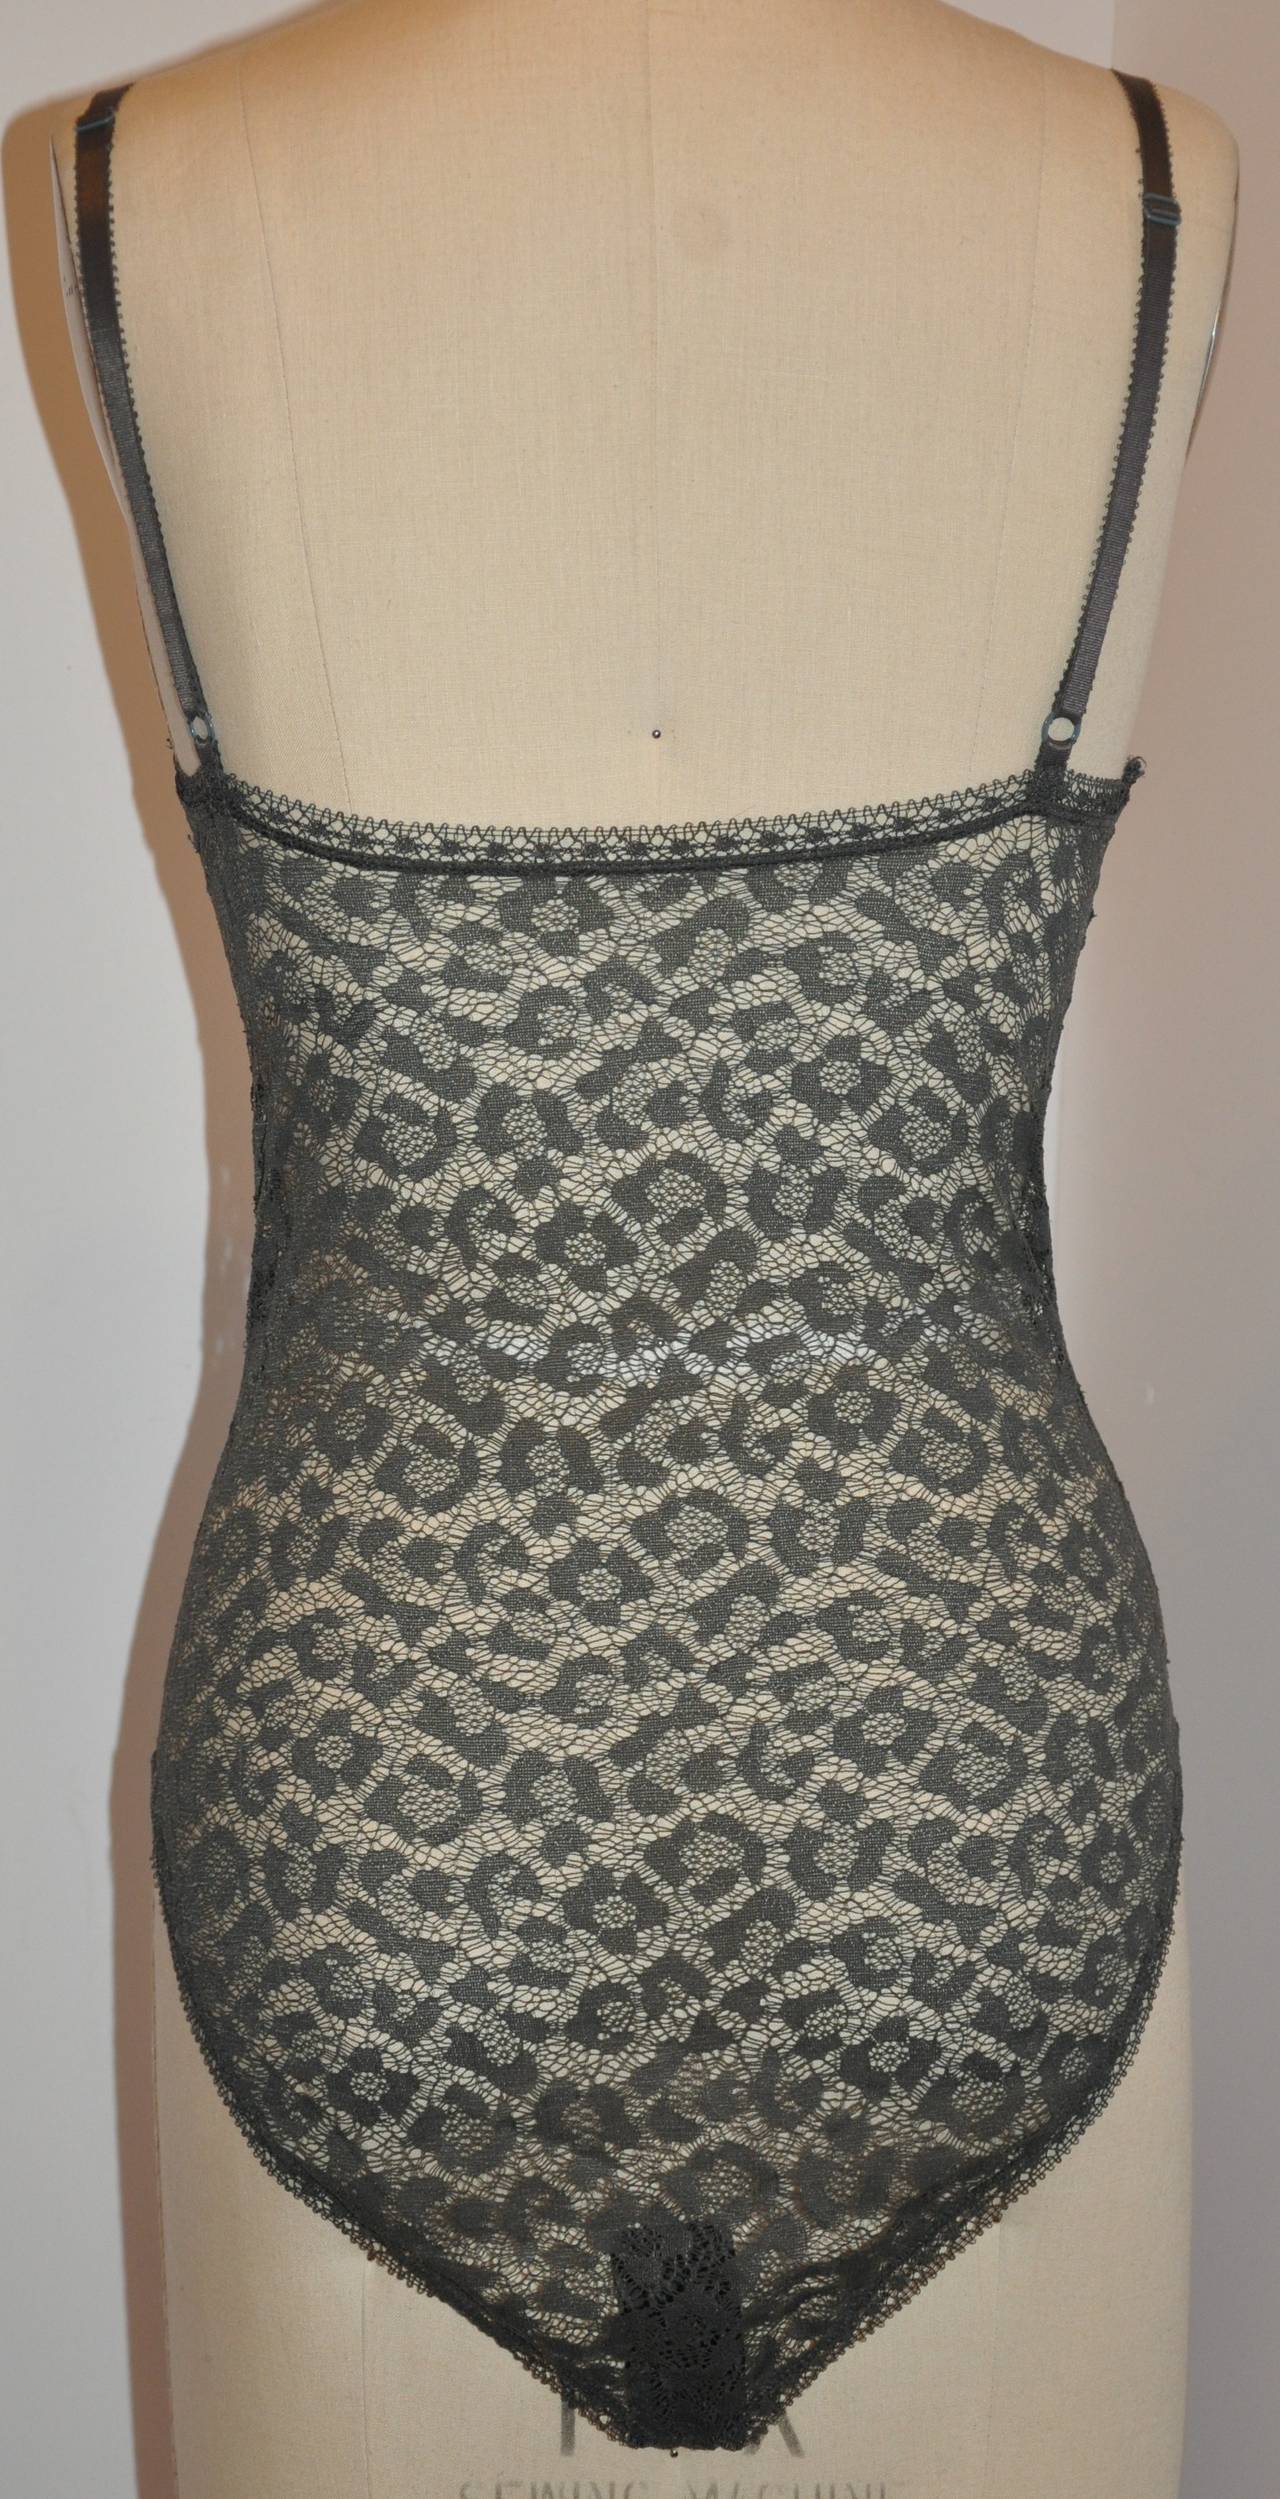 ERES Charcoal Floral Lace BodySuit with Burgundy Bow Accent In Excellent Condition For Sale In New York, NY